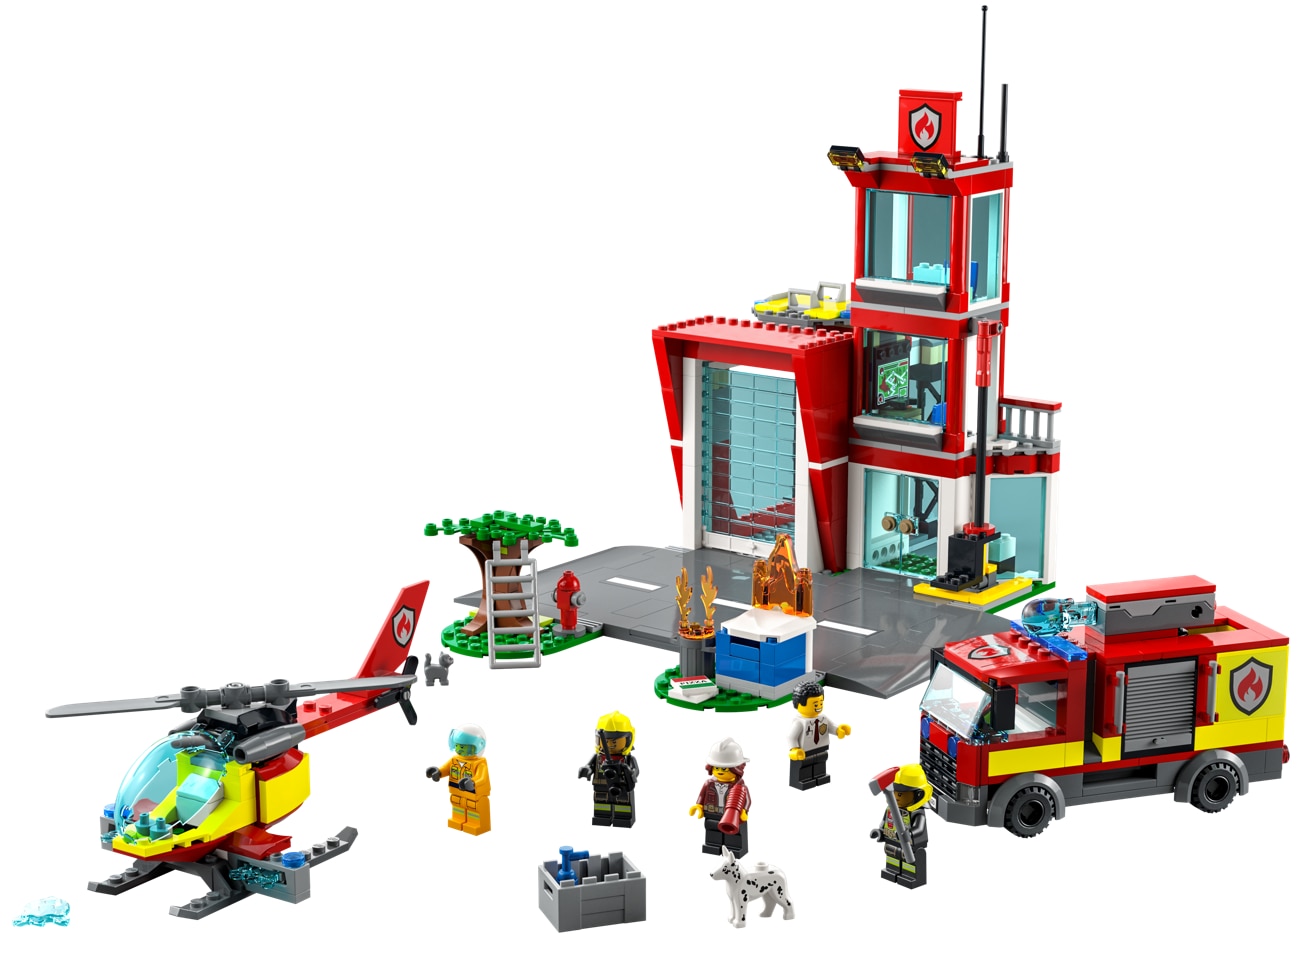 A picture containing toy, LEGO, colorful Description automatically generated